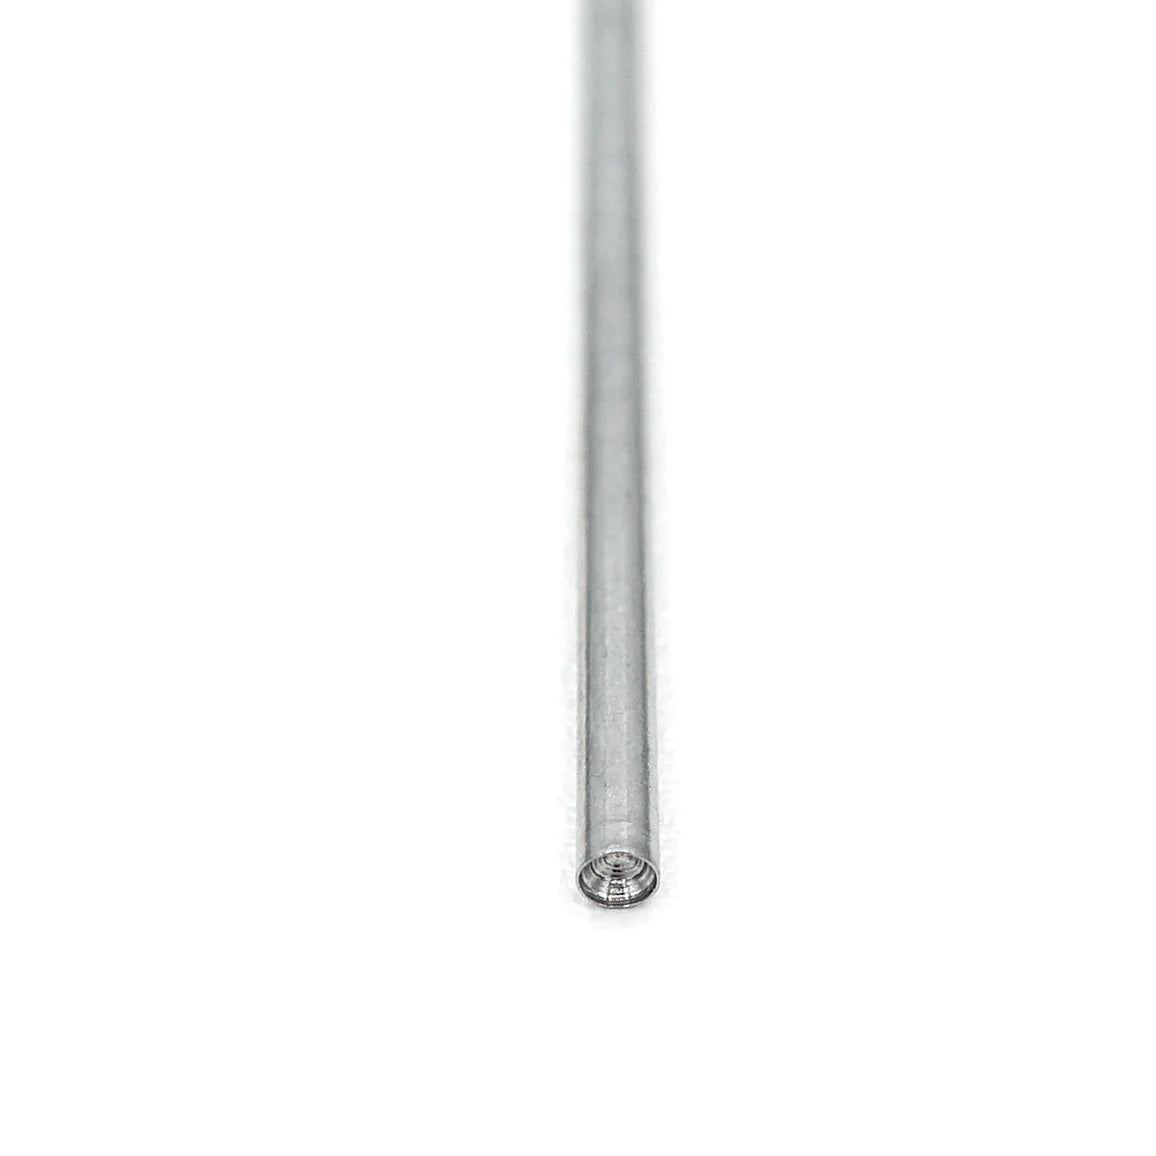 16G Tapers sterile pack of 50 – Earth Rise Supply